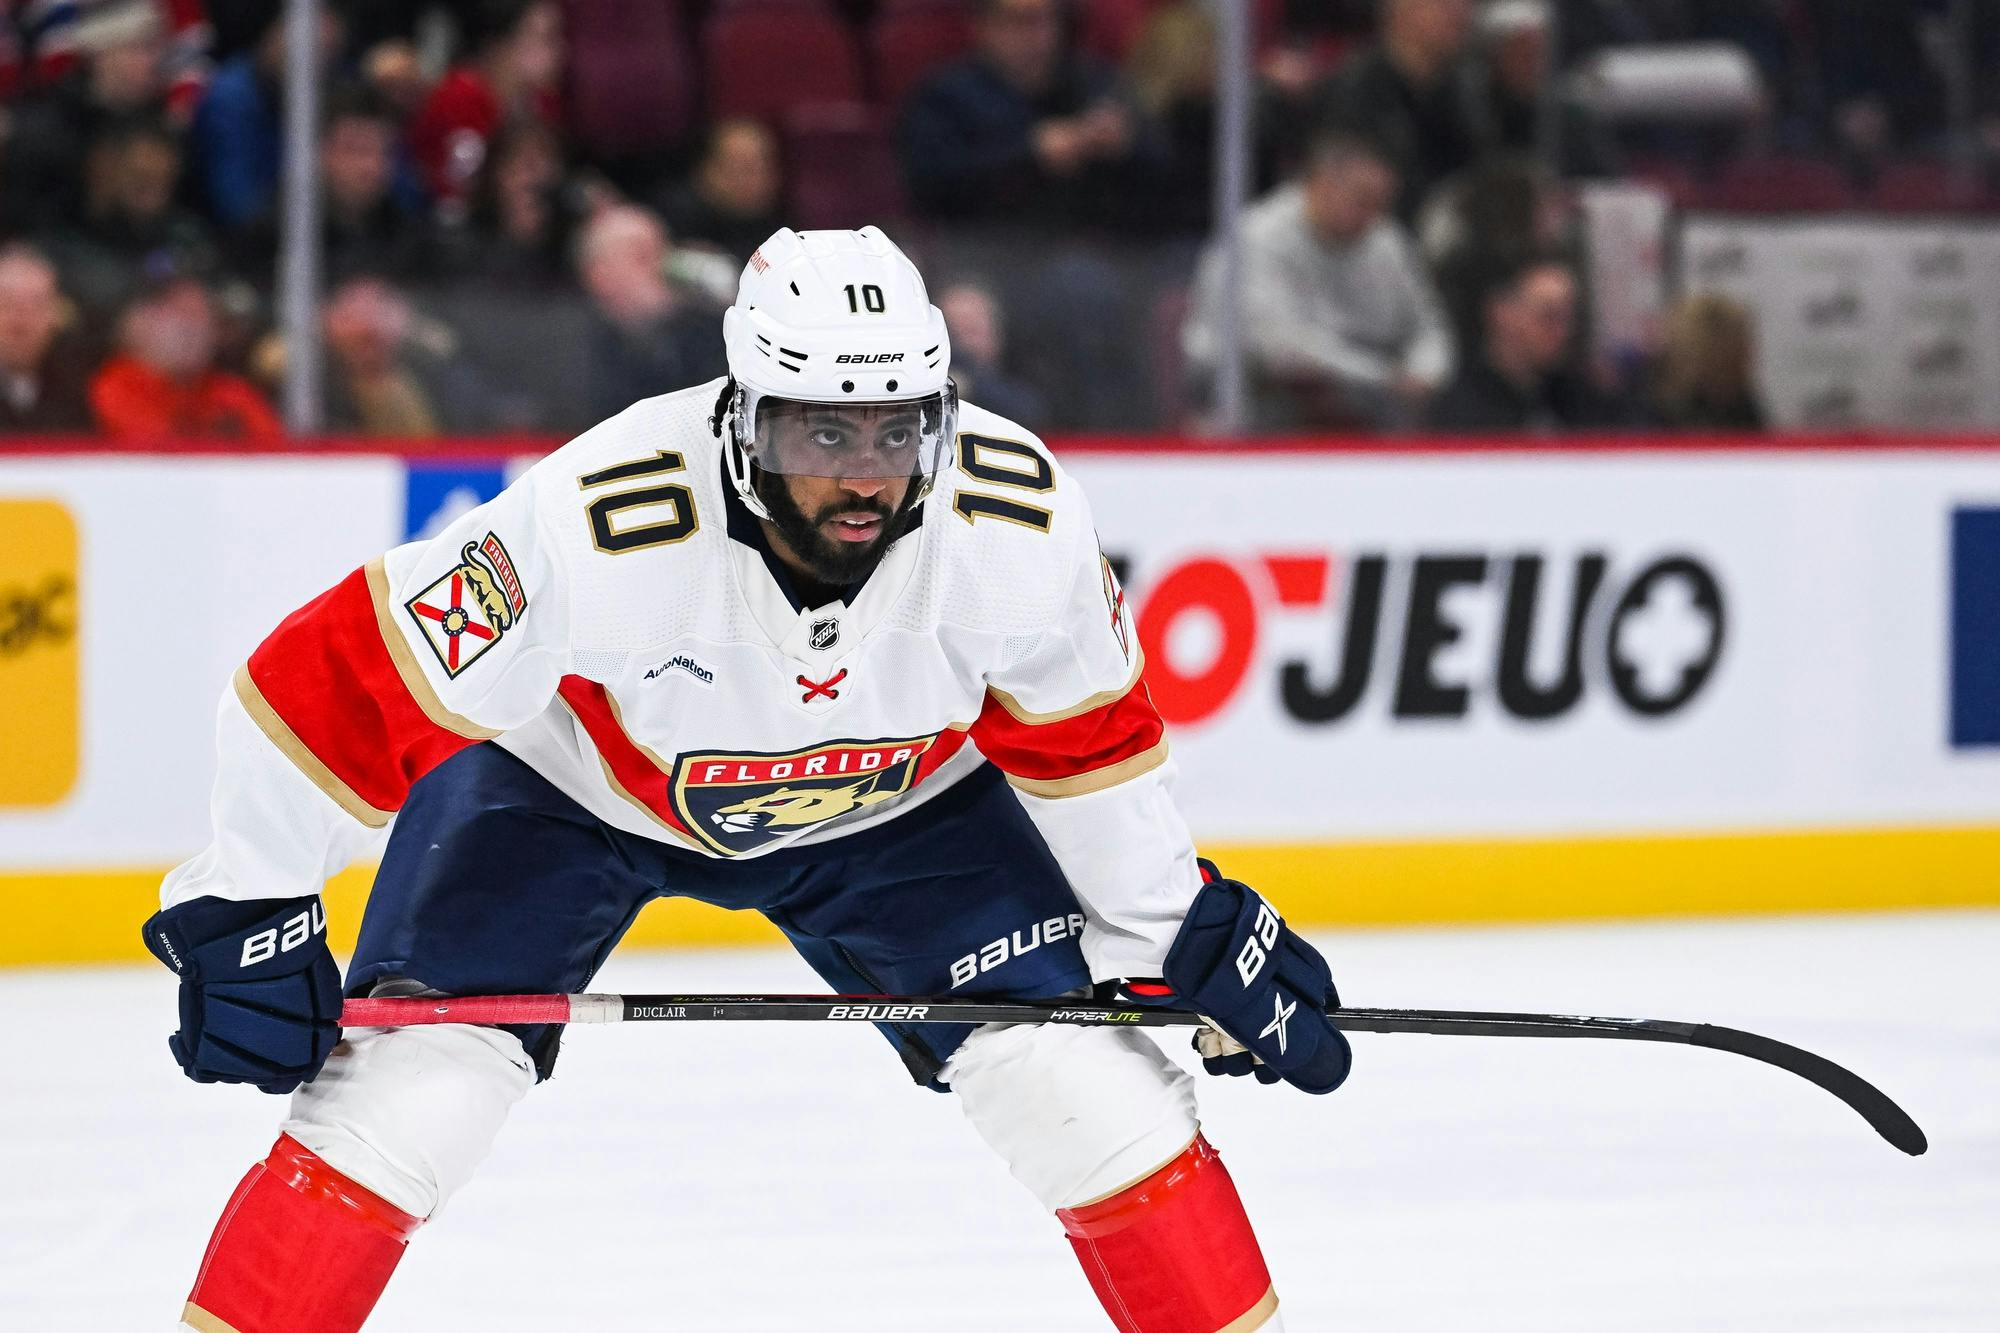 Sixth time's the charm: After bouncing around NHL, Anthony Duclair